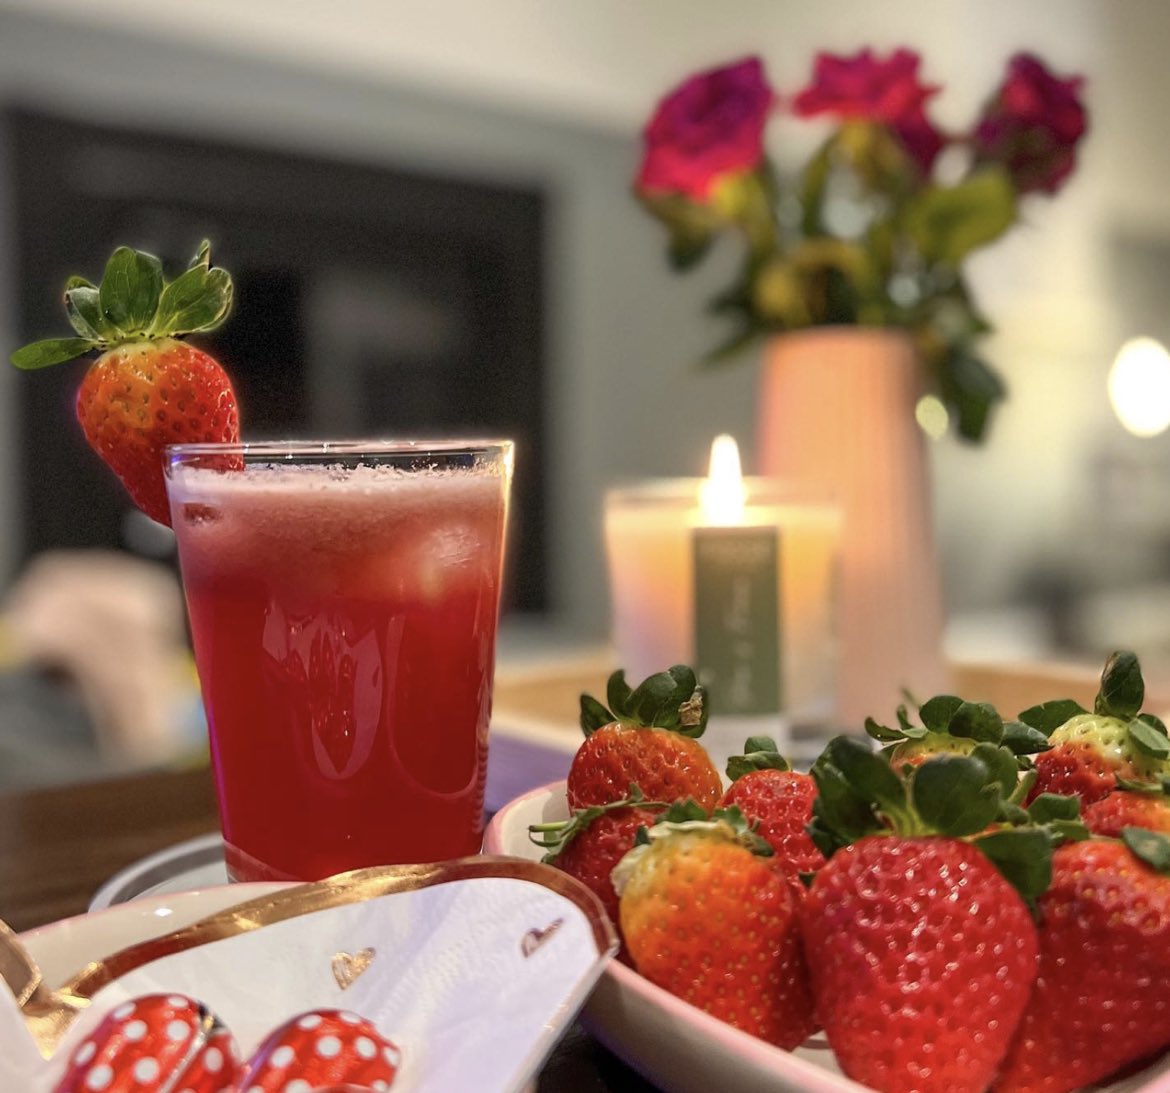 Friday night spent right 😍 How are you spending yours? #ItsFunkingTime #funkincocktails #strawberrydaiquiri #cocktailsathome